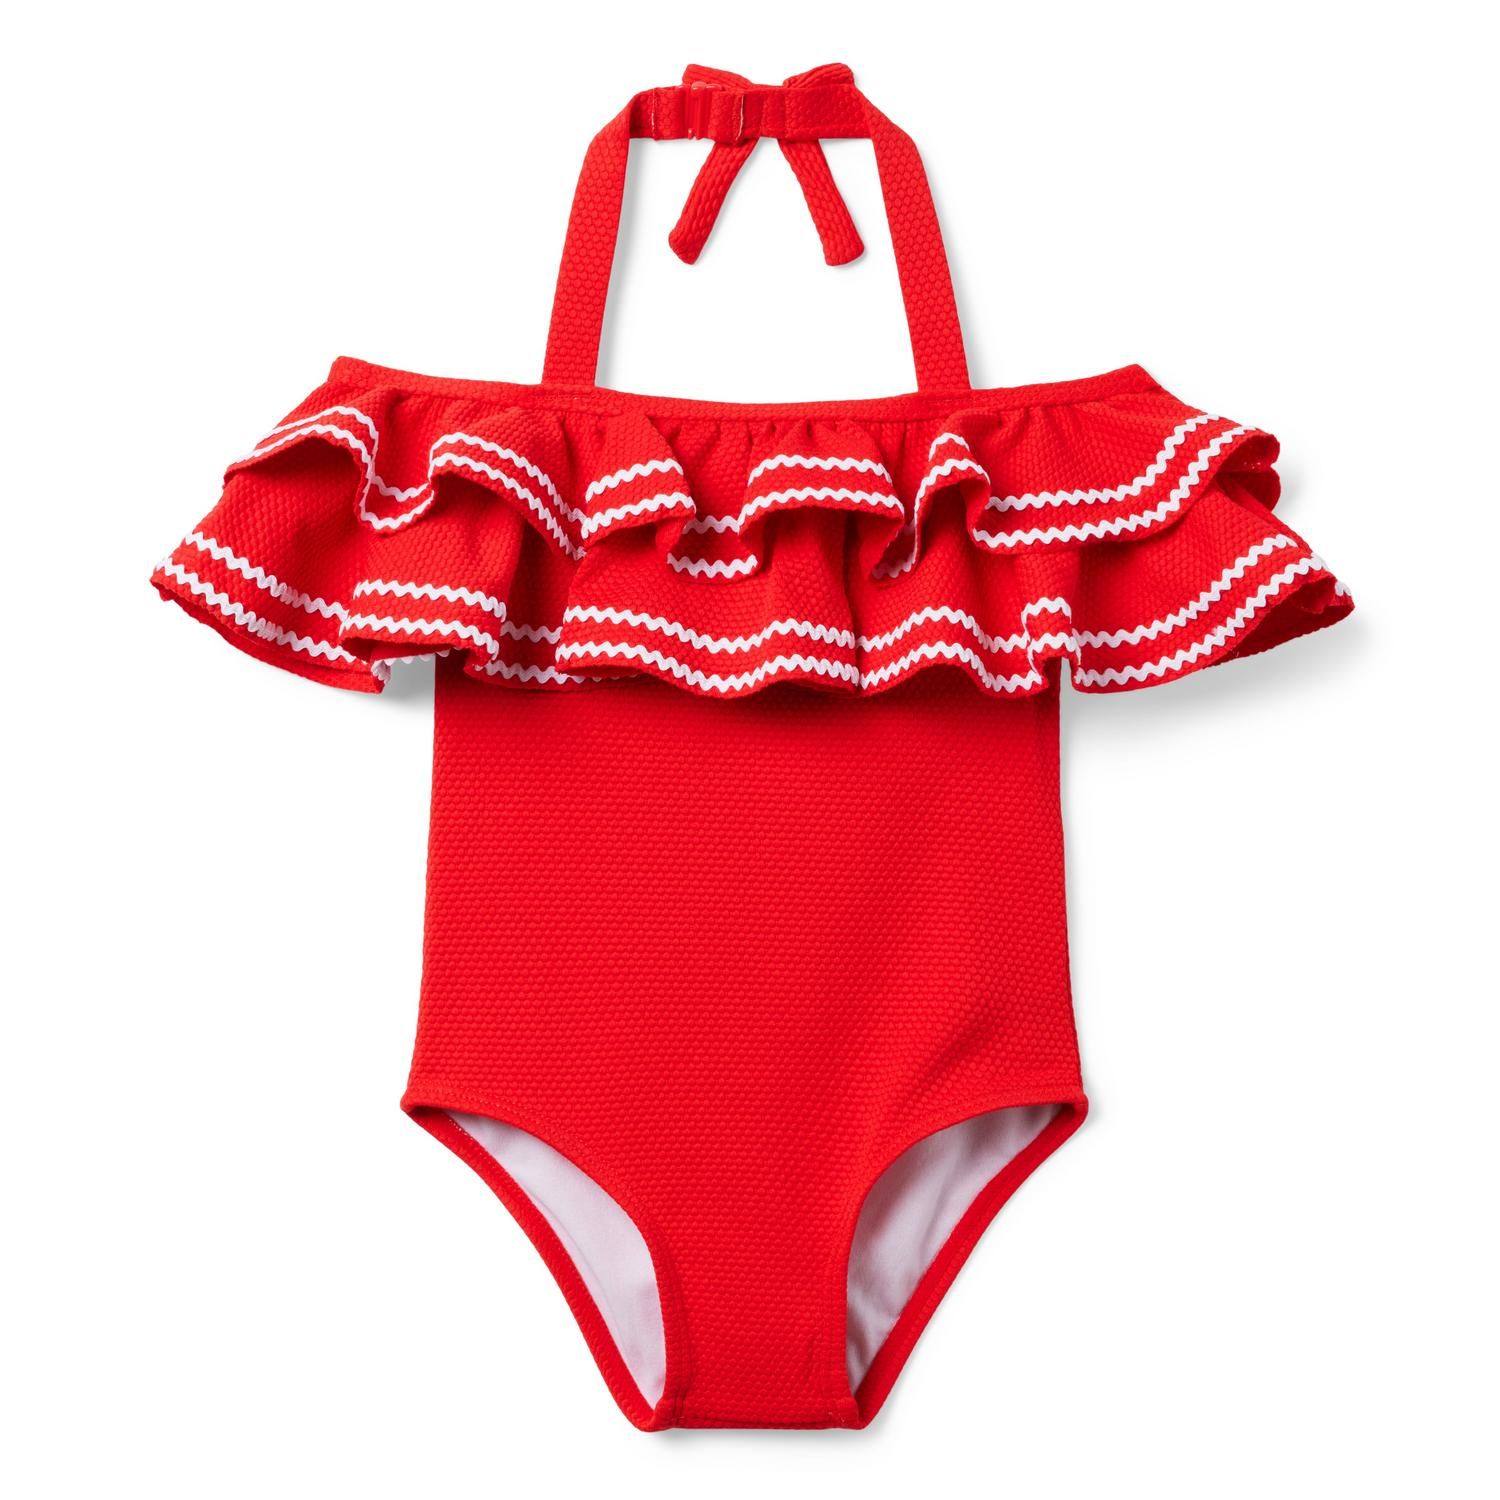 Recycled Ric Rac Ruffle Swimsuit | Janie and Jack